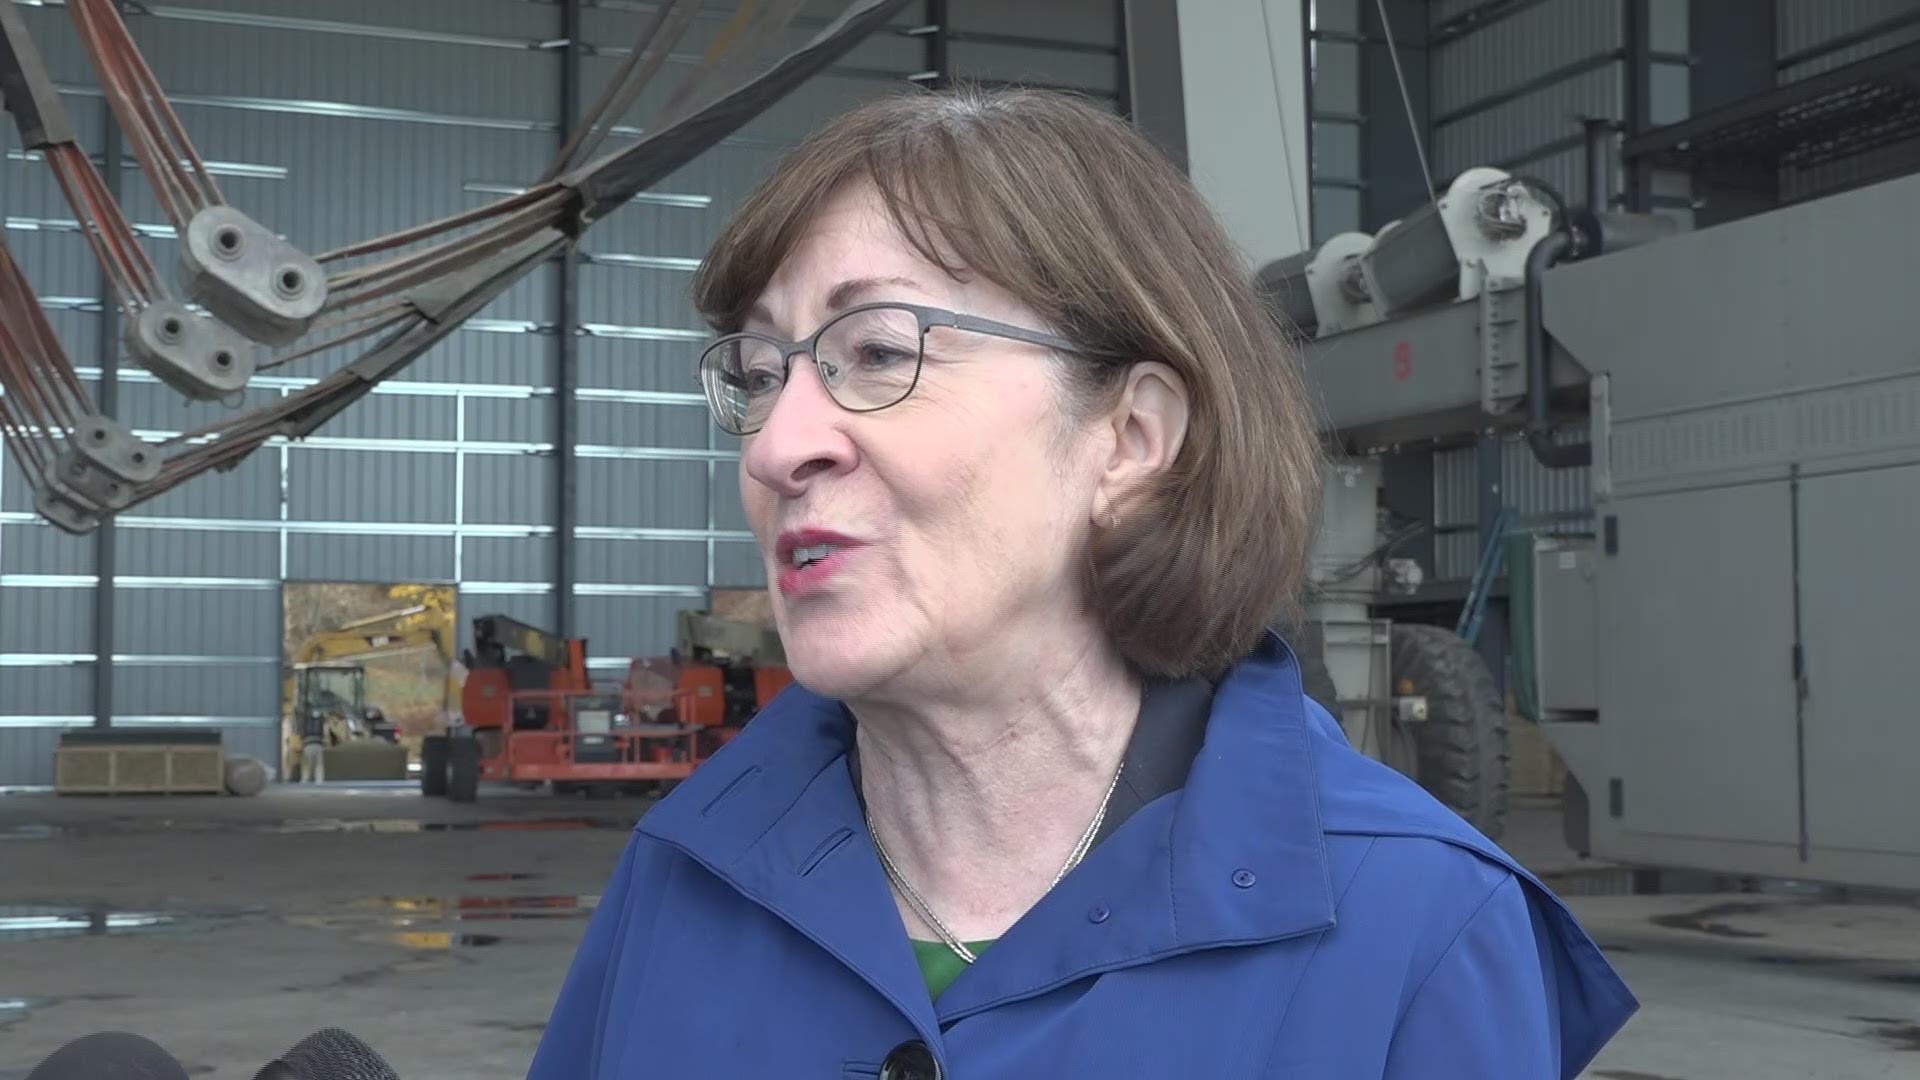 Senator Susan Collins discusses governor elect, Janet Mills, to congratulate her, how her role will change in Washington and possible tension between the senate and newly democratic house.